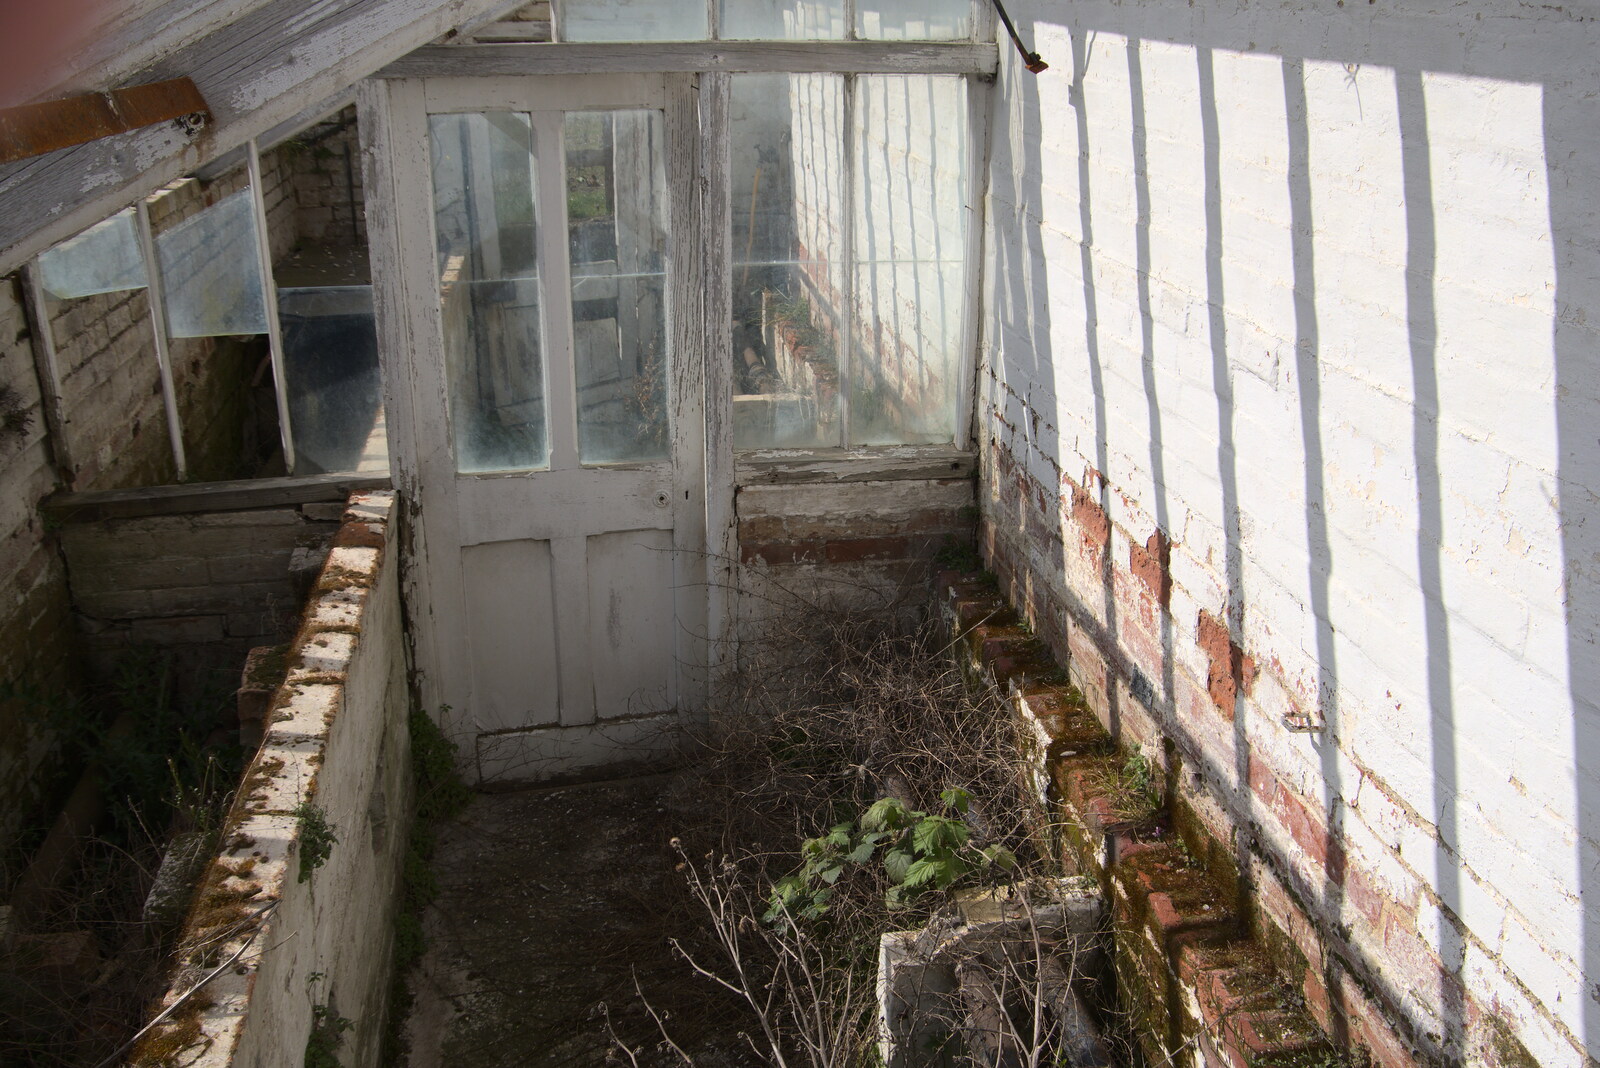 A derelict greenhouse from A Return to Ickworth House, Horringer, Suffolk - 11th April 2021